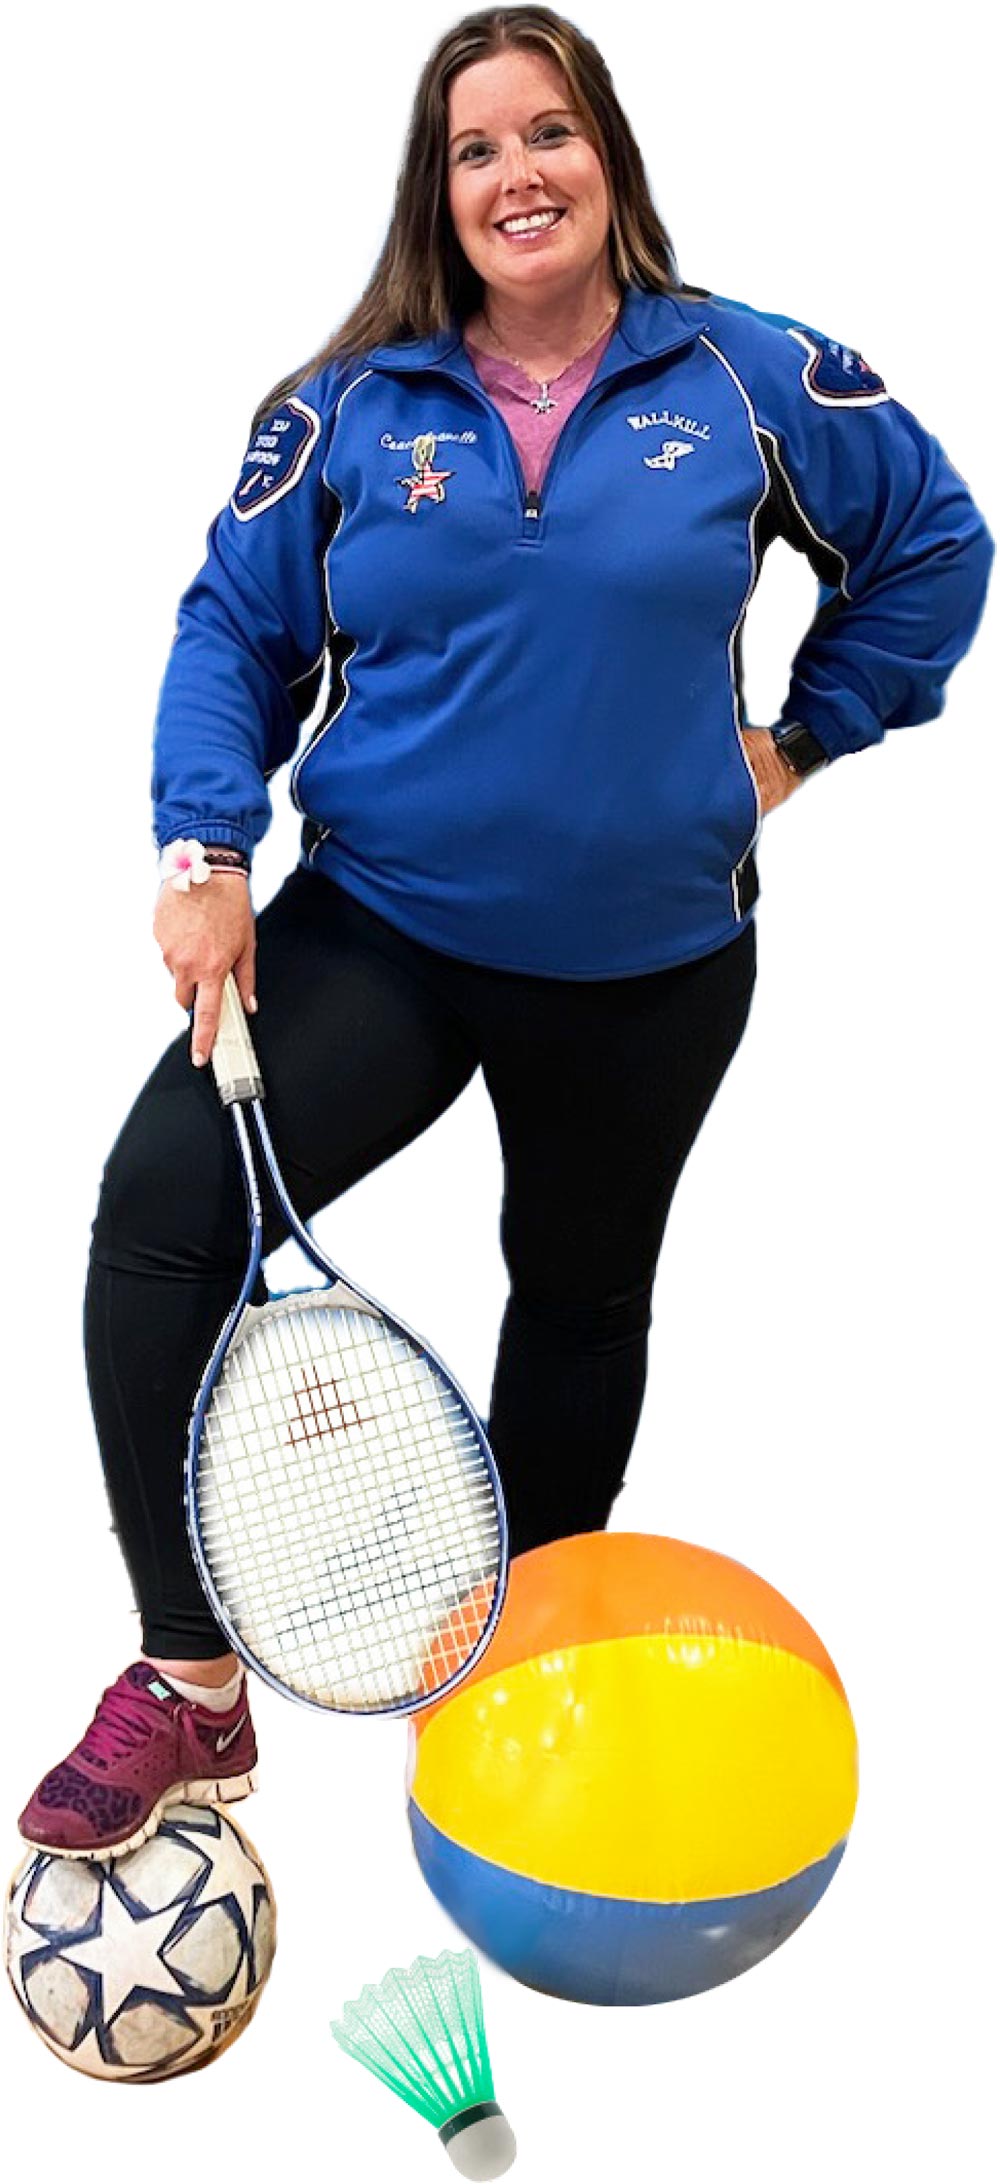 Jennifer Gravelle smiling in a blue/white/black Wallkill custom sport jacket holding a blue/white tennis racket with a soccer ball, a beach ball and an enlarged shuttlecock at her feet